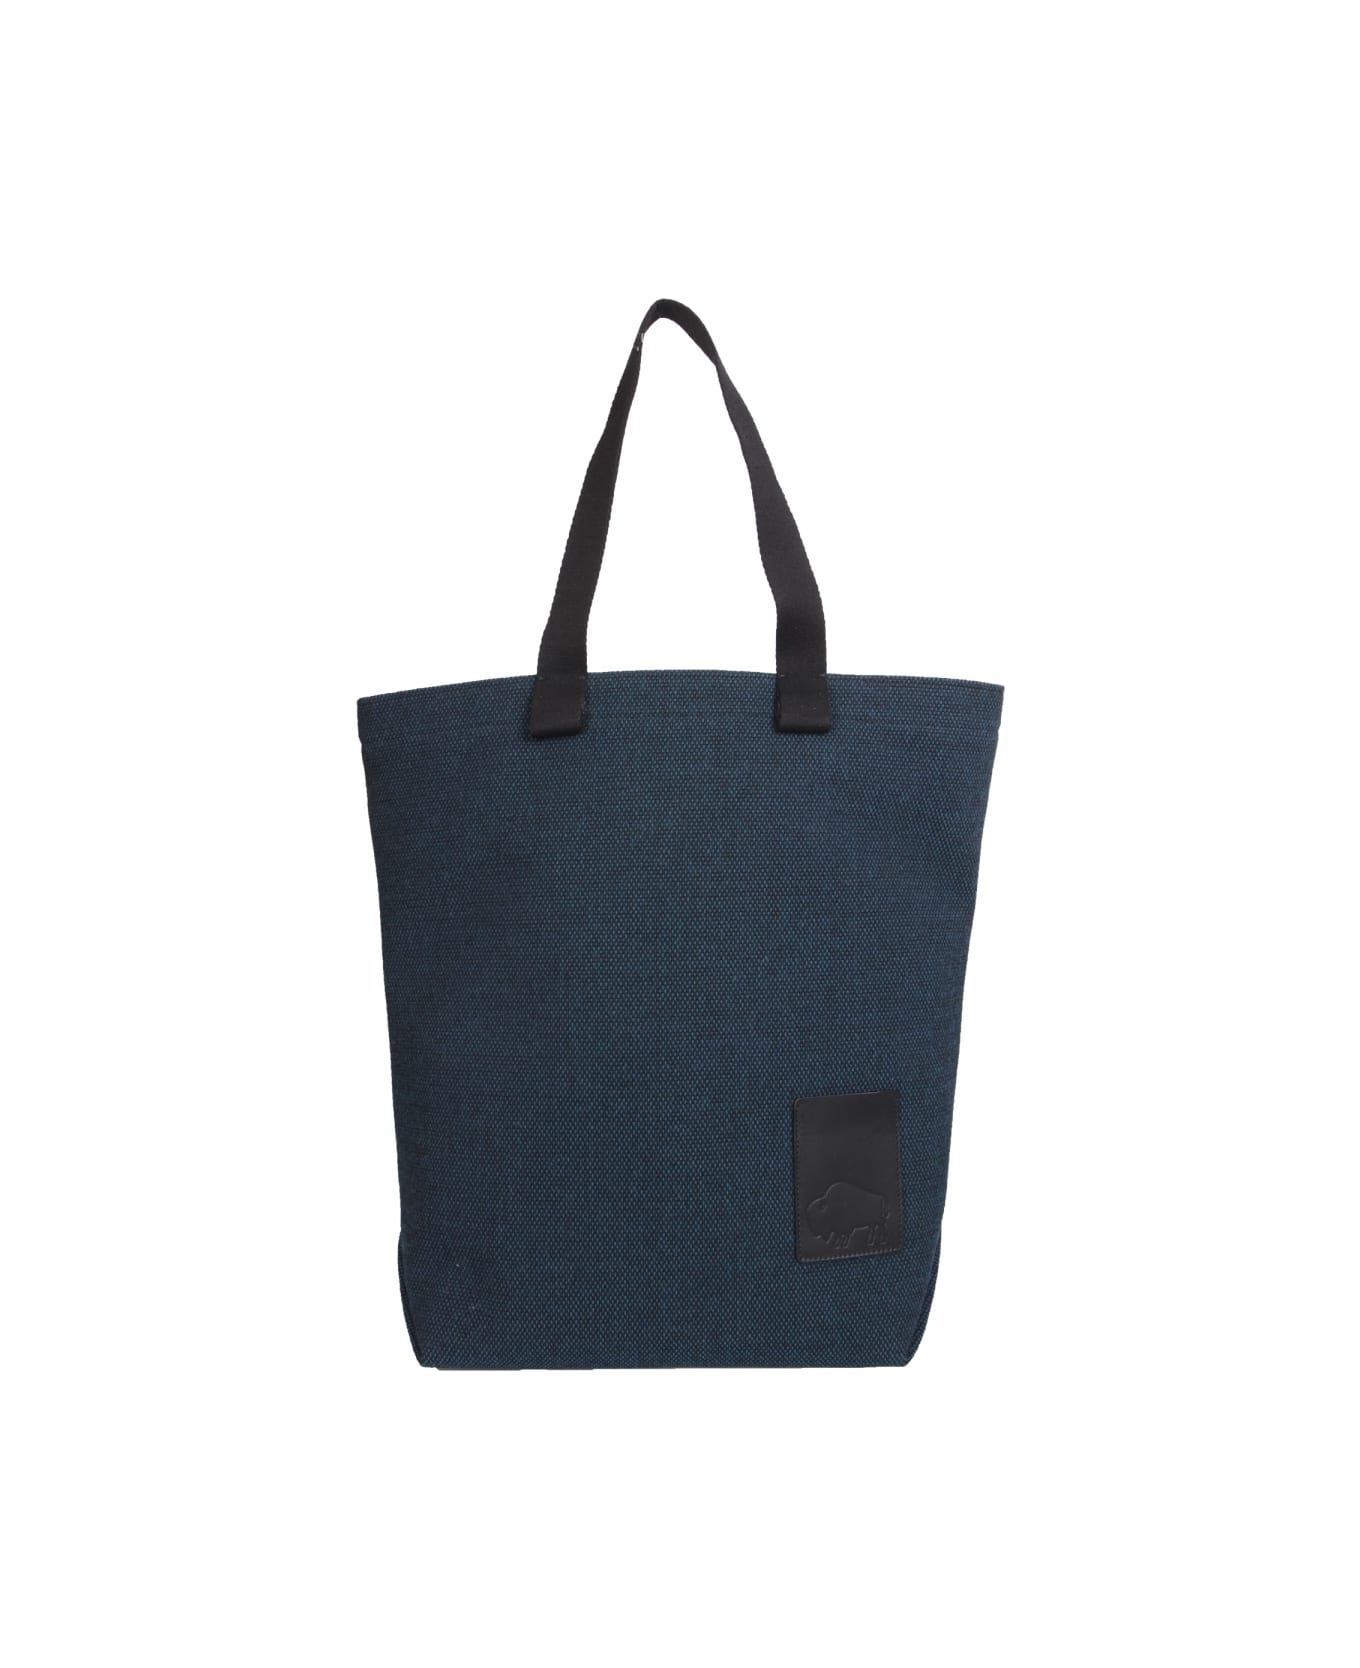 Il Bisonte Canvas Shopping Bag - GREEN トートバッグ